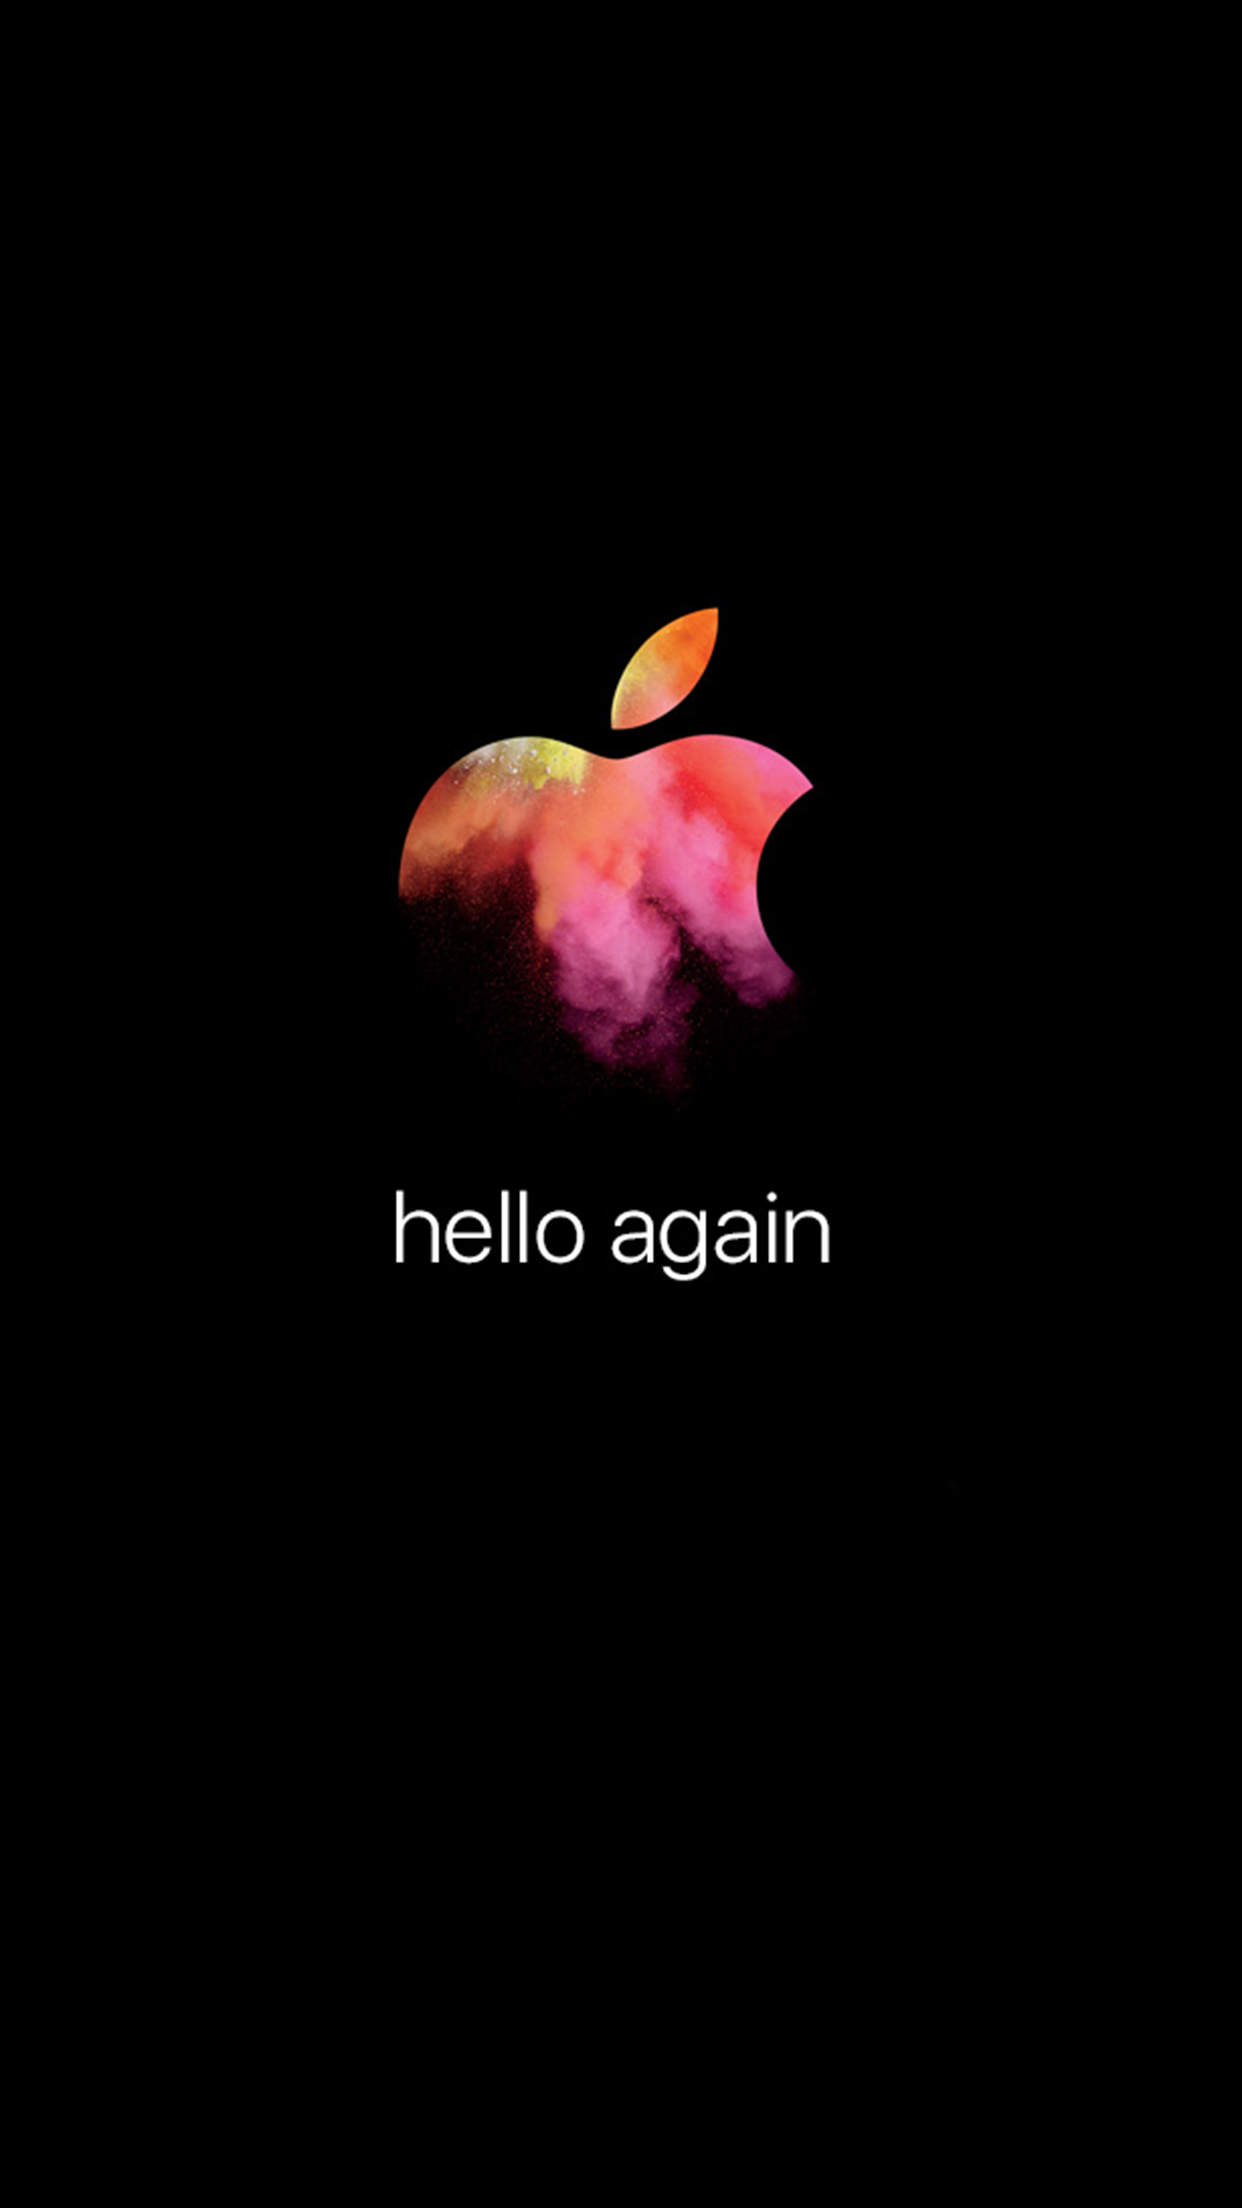 Get ready for Apple's Mac event with these wallpaper. Cult of Mac